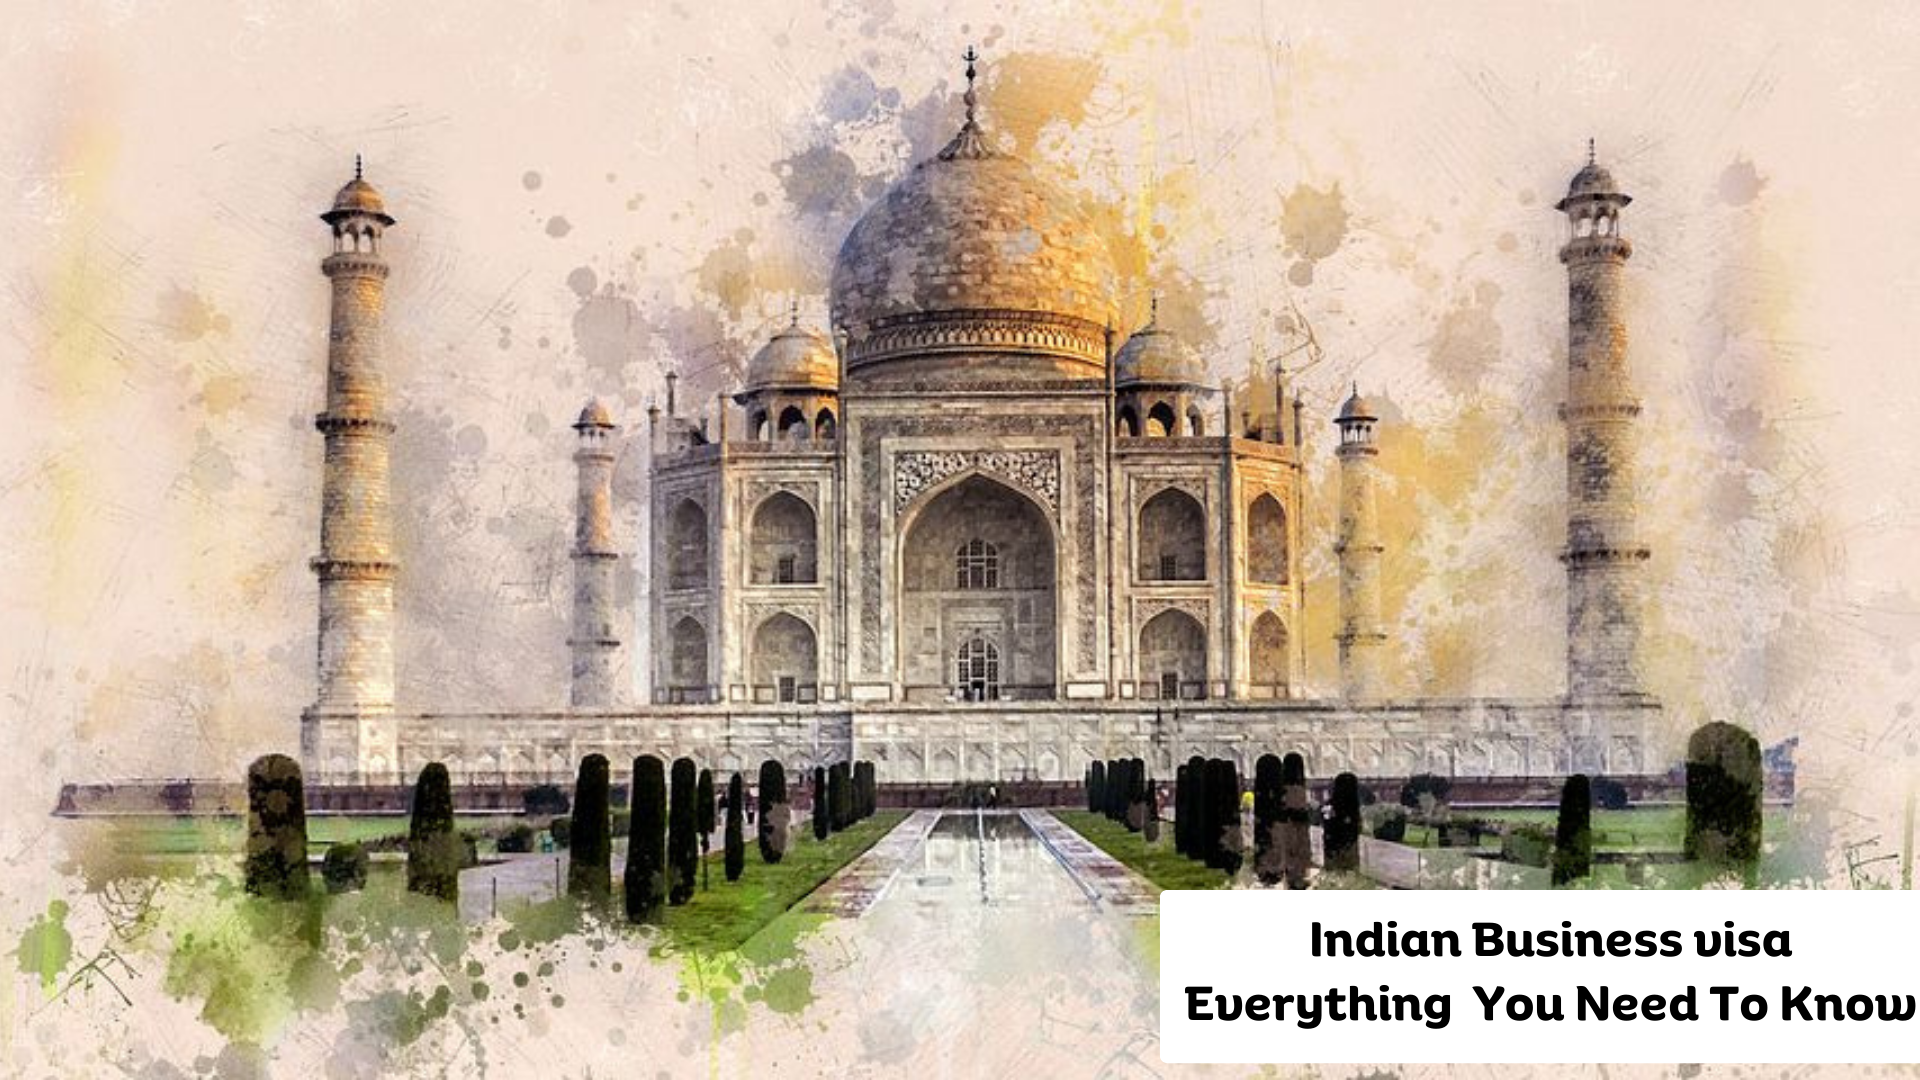 Indian Business Visa Everything You Need to Know